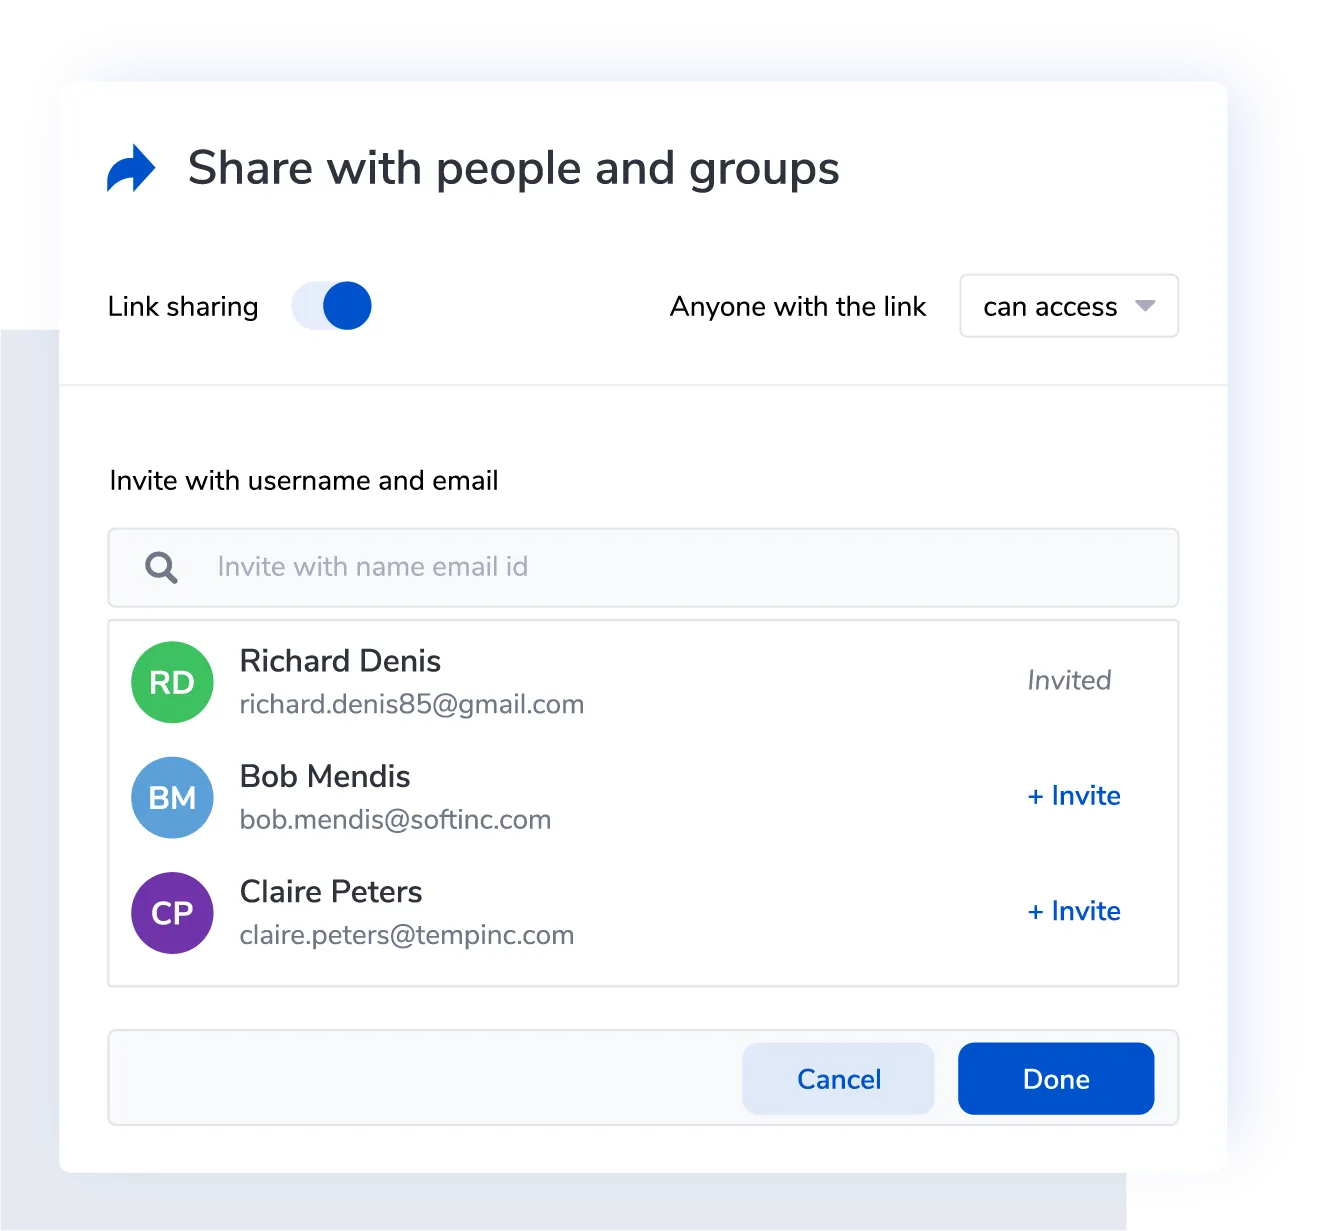 Share with  users and groups in your org